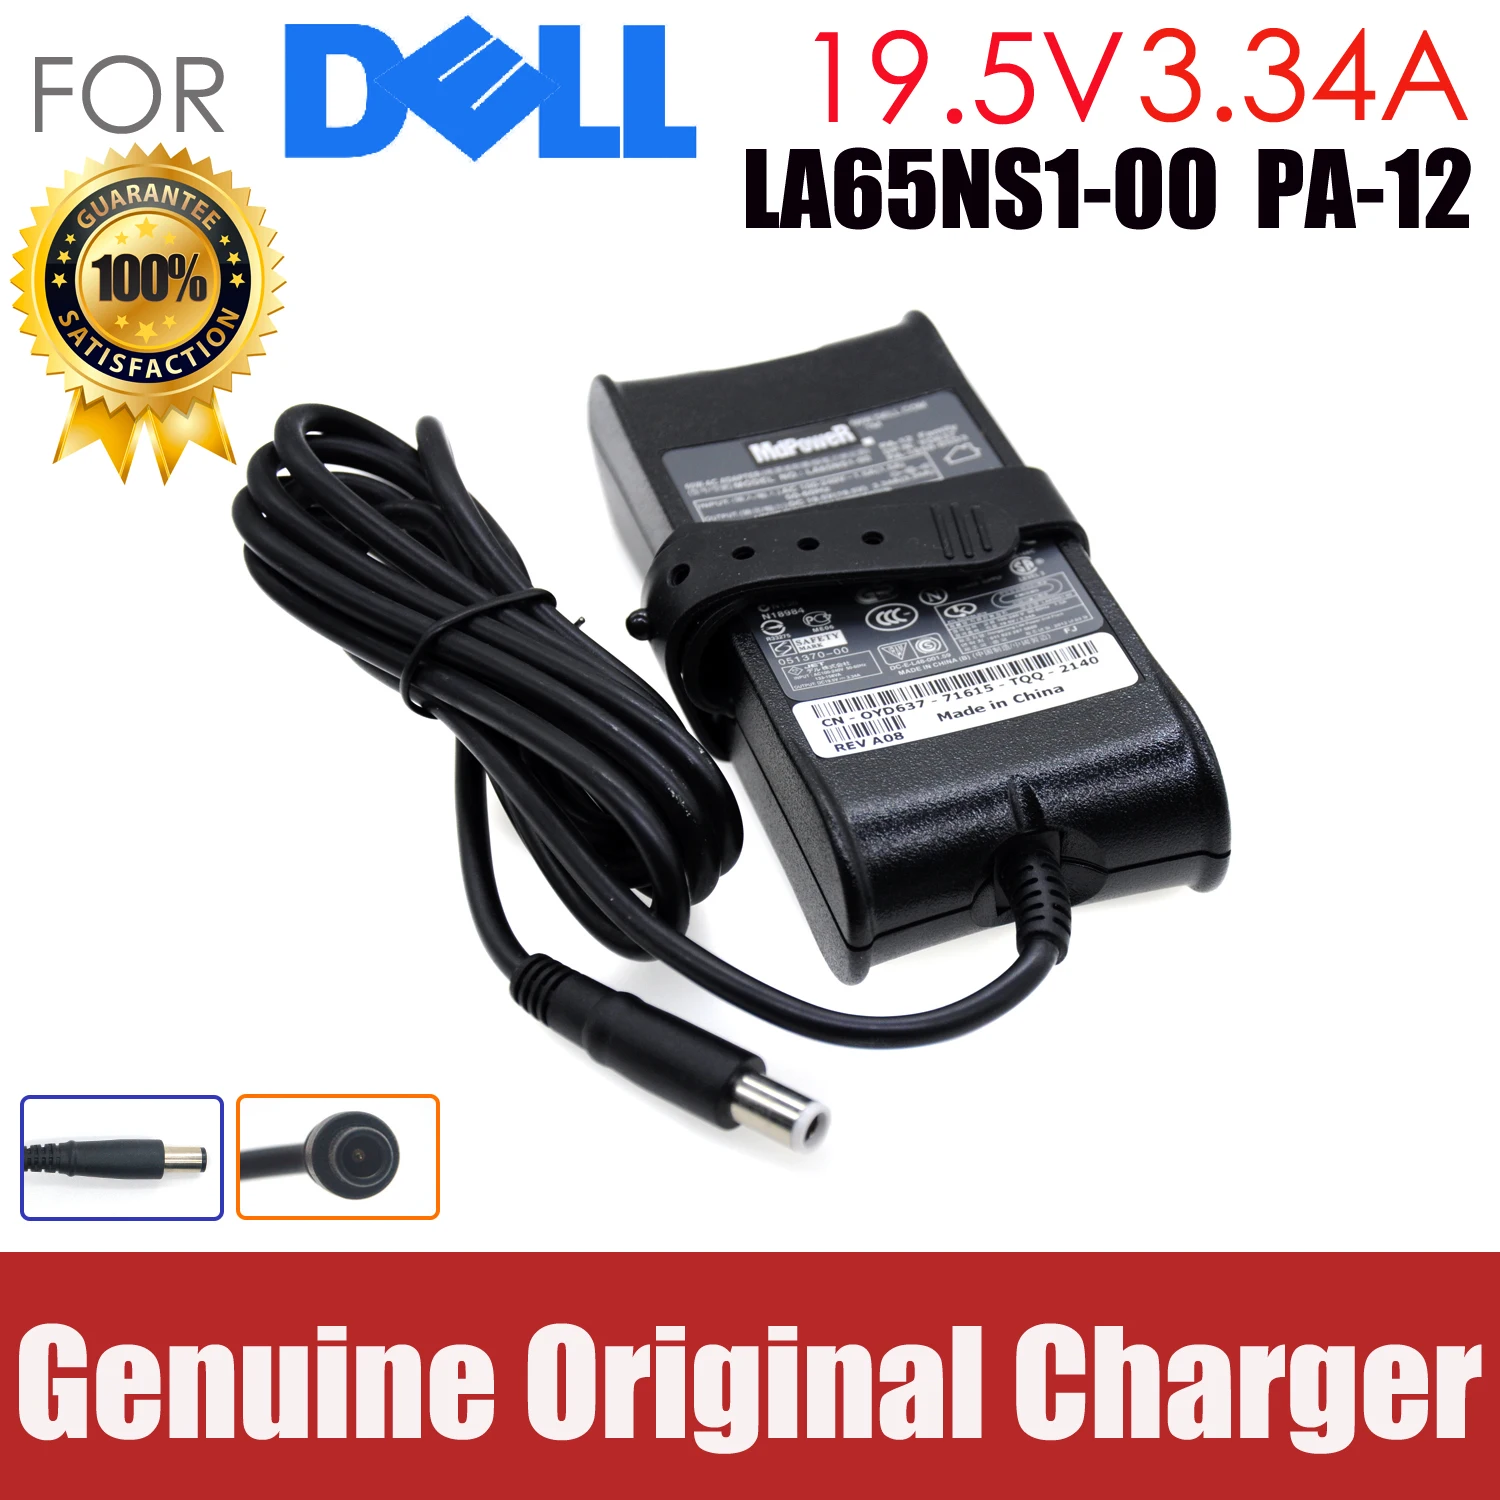 

Original 19.5V 3.34A 65W AC Adapter Charger for Dell Inspiron Inspiron 15-5545 15-5548 15-5557 PA-1650-15D2 PP29L PP38L PP39L